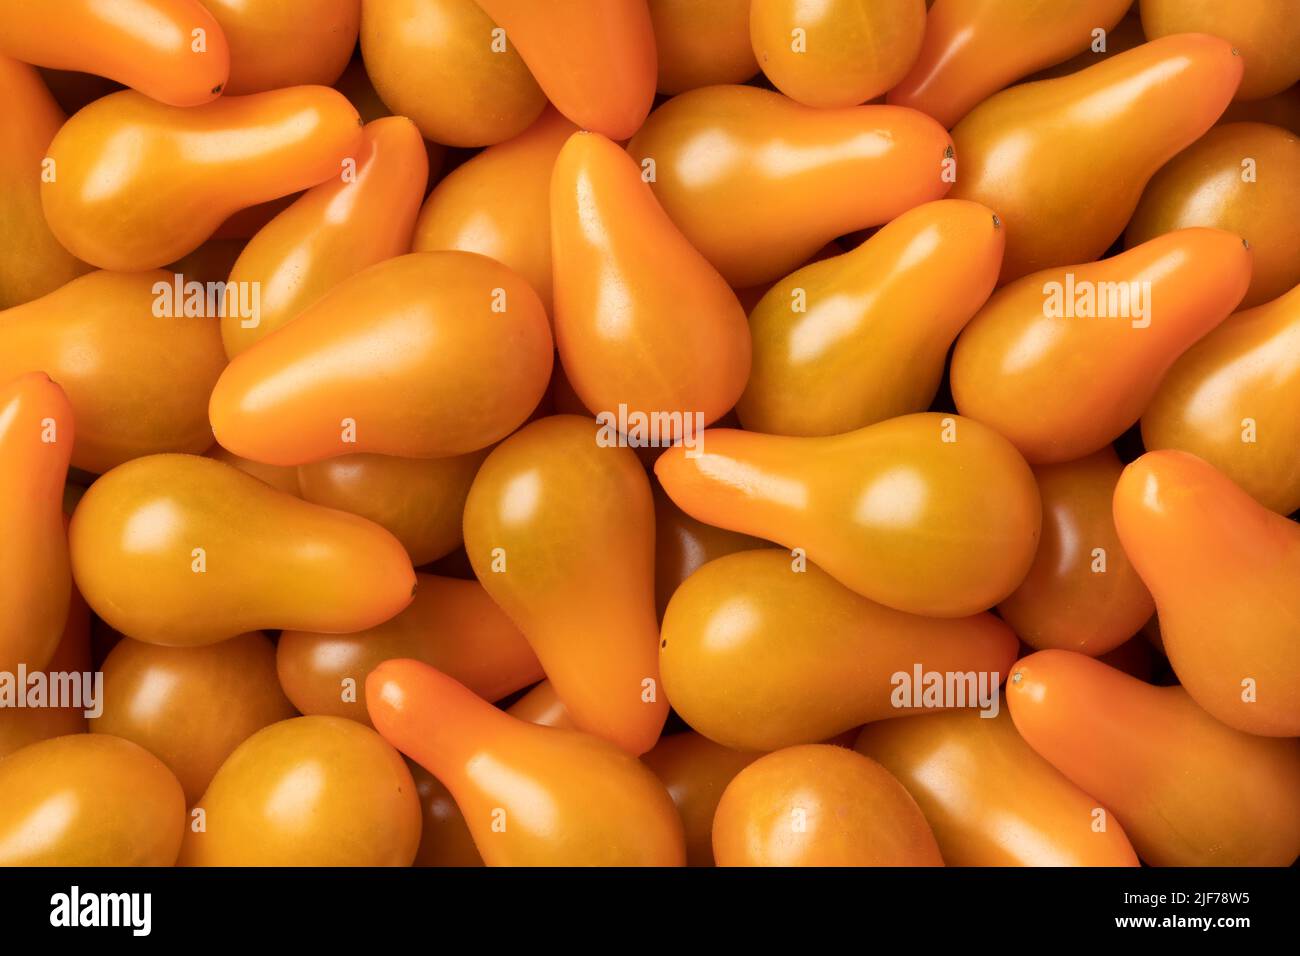 Yellow whole small pear tomatoes close up full frame as background Stock Photo